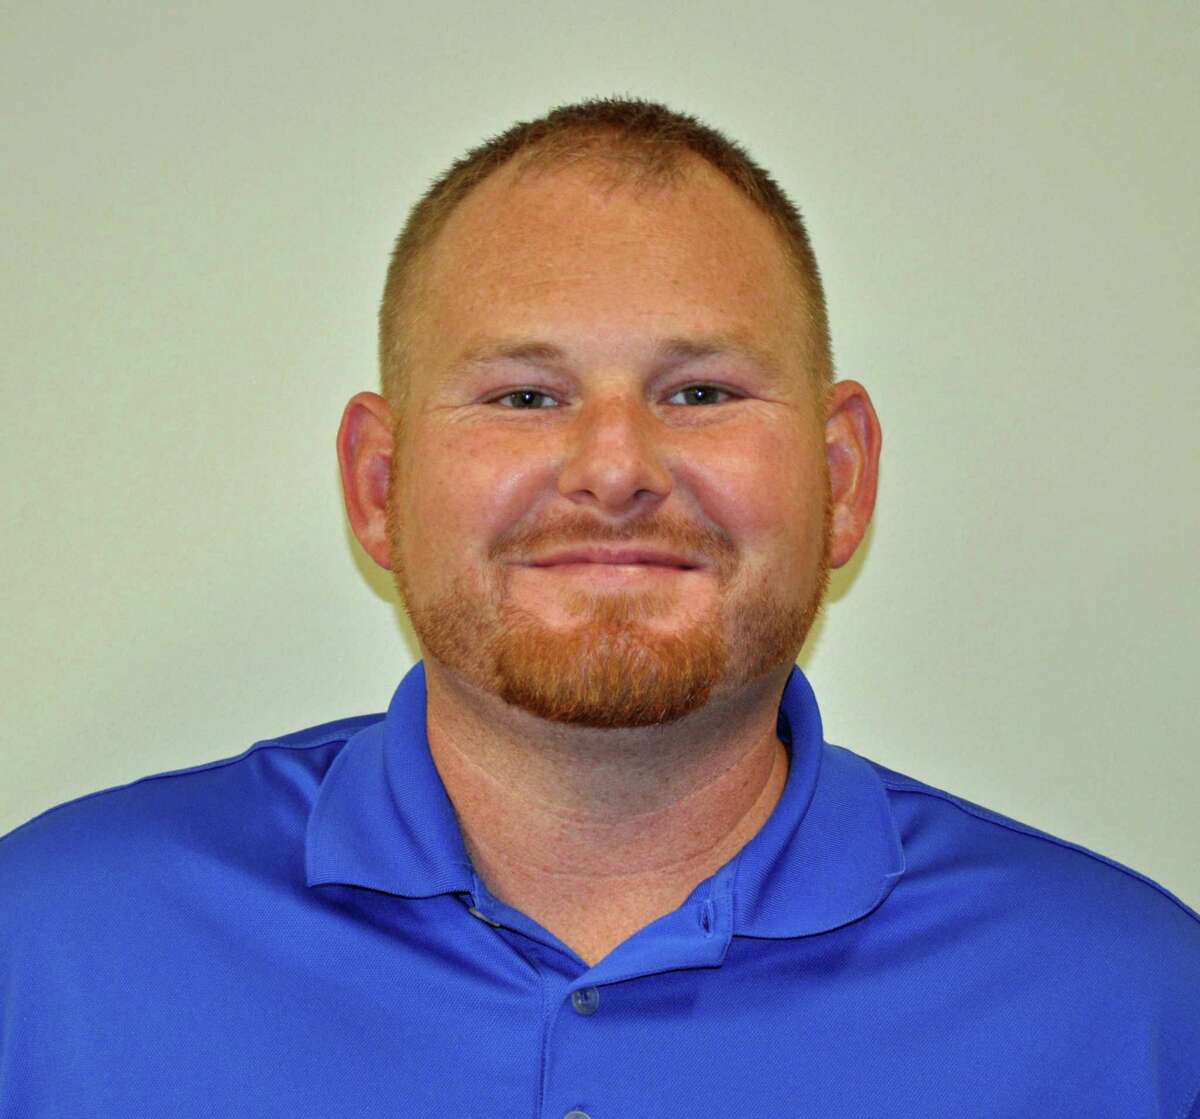 Ashton Woods Homes has hired Troy Robinson as area construction manager for the builderâs south Houston communities, overseeing projects in Southern Trails, Riverstone, Summer Lakes and Hidden Lakes.